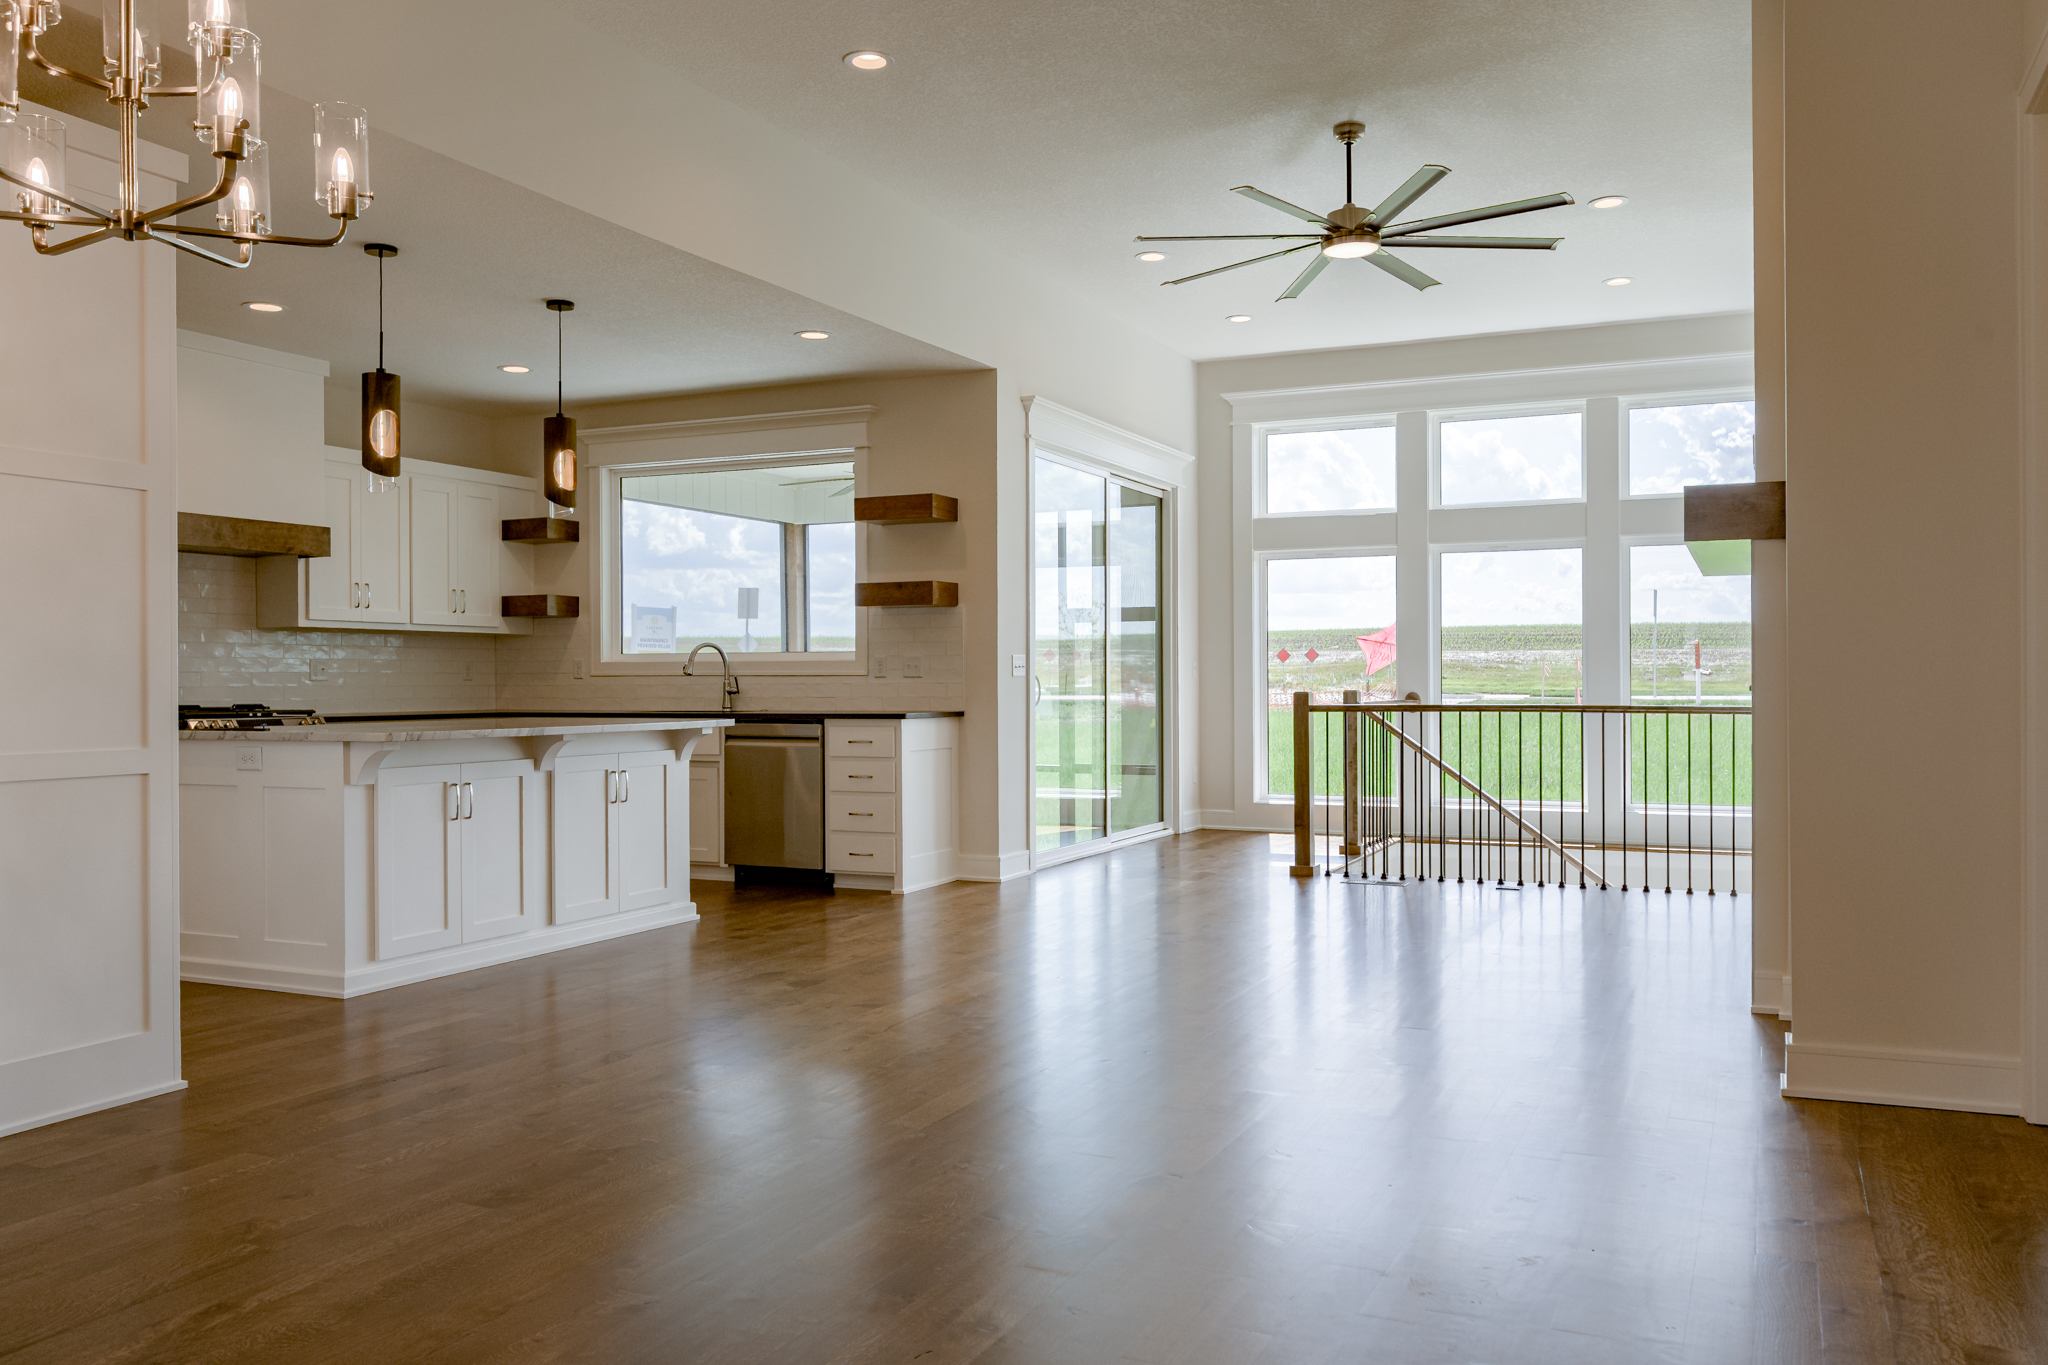 The Truman reverse 1.5-story floor plan with open concept kitchen and great room by Patriot Homes.